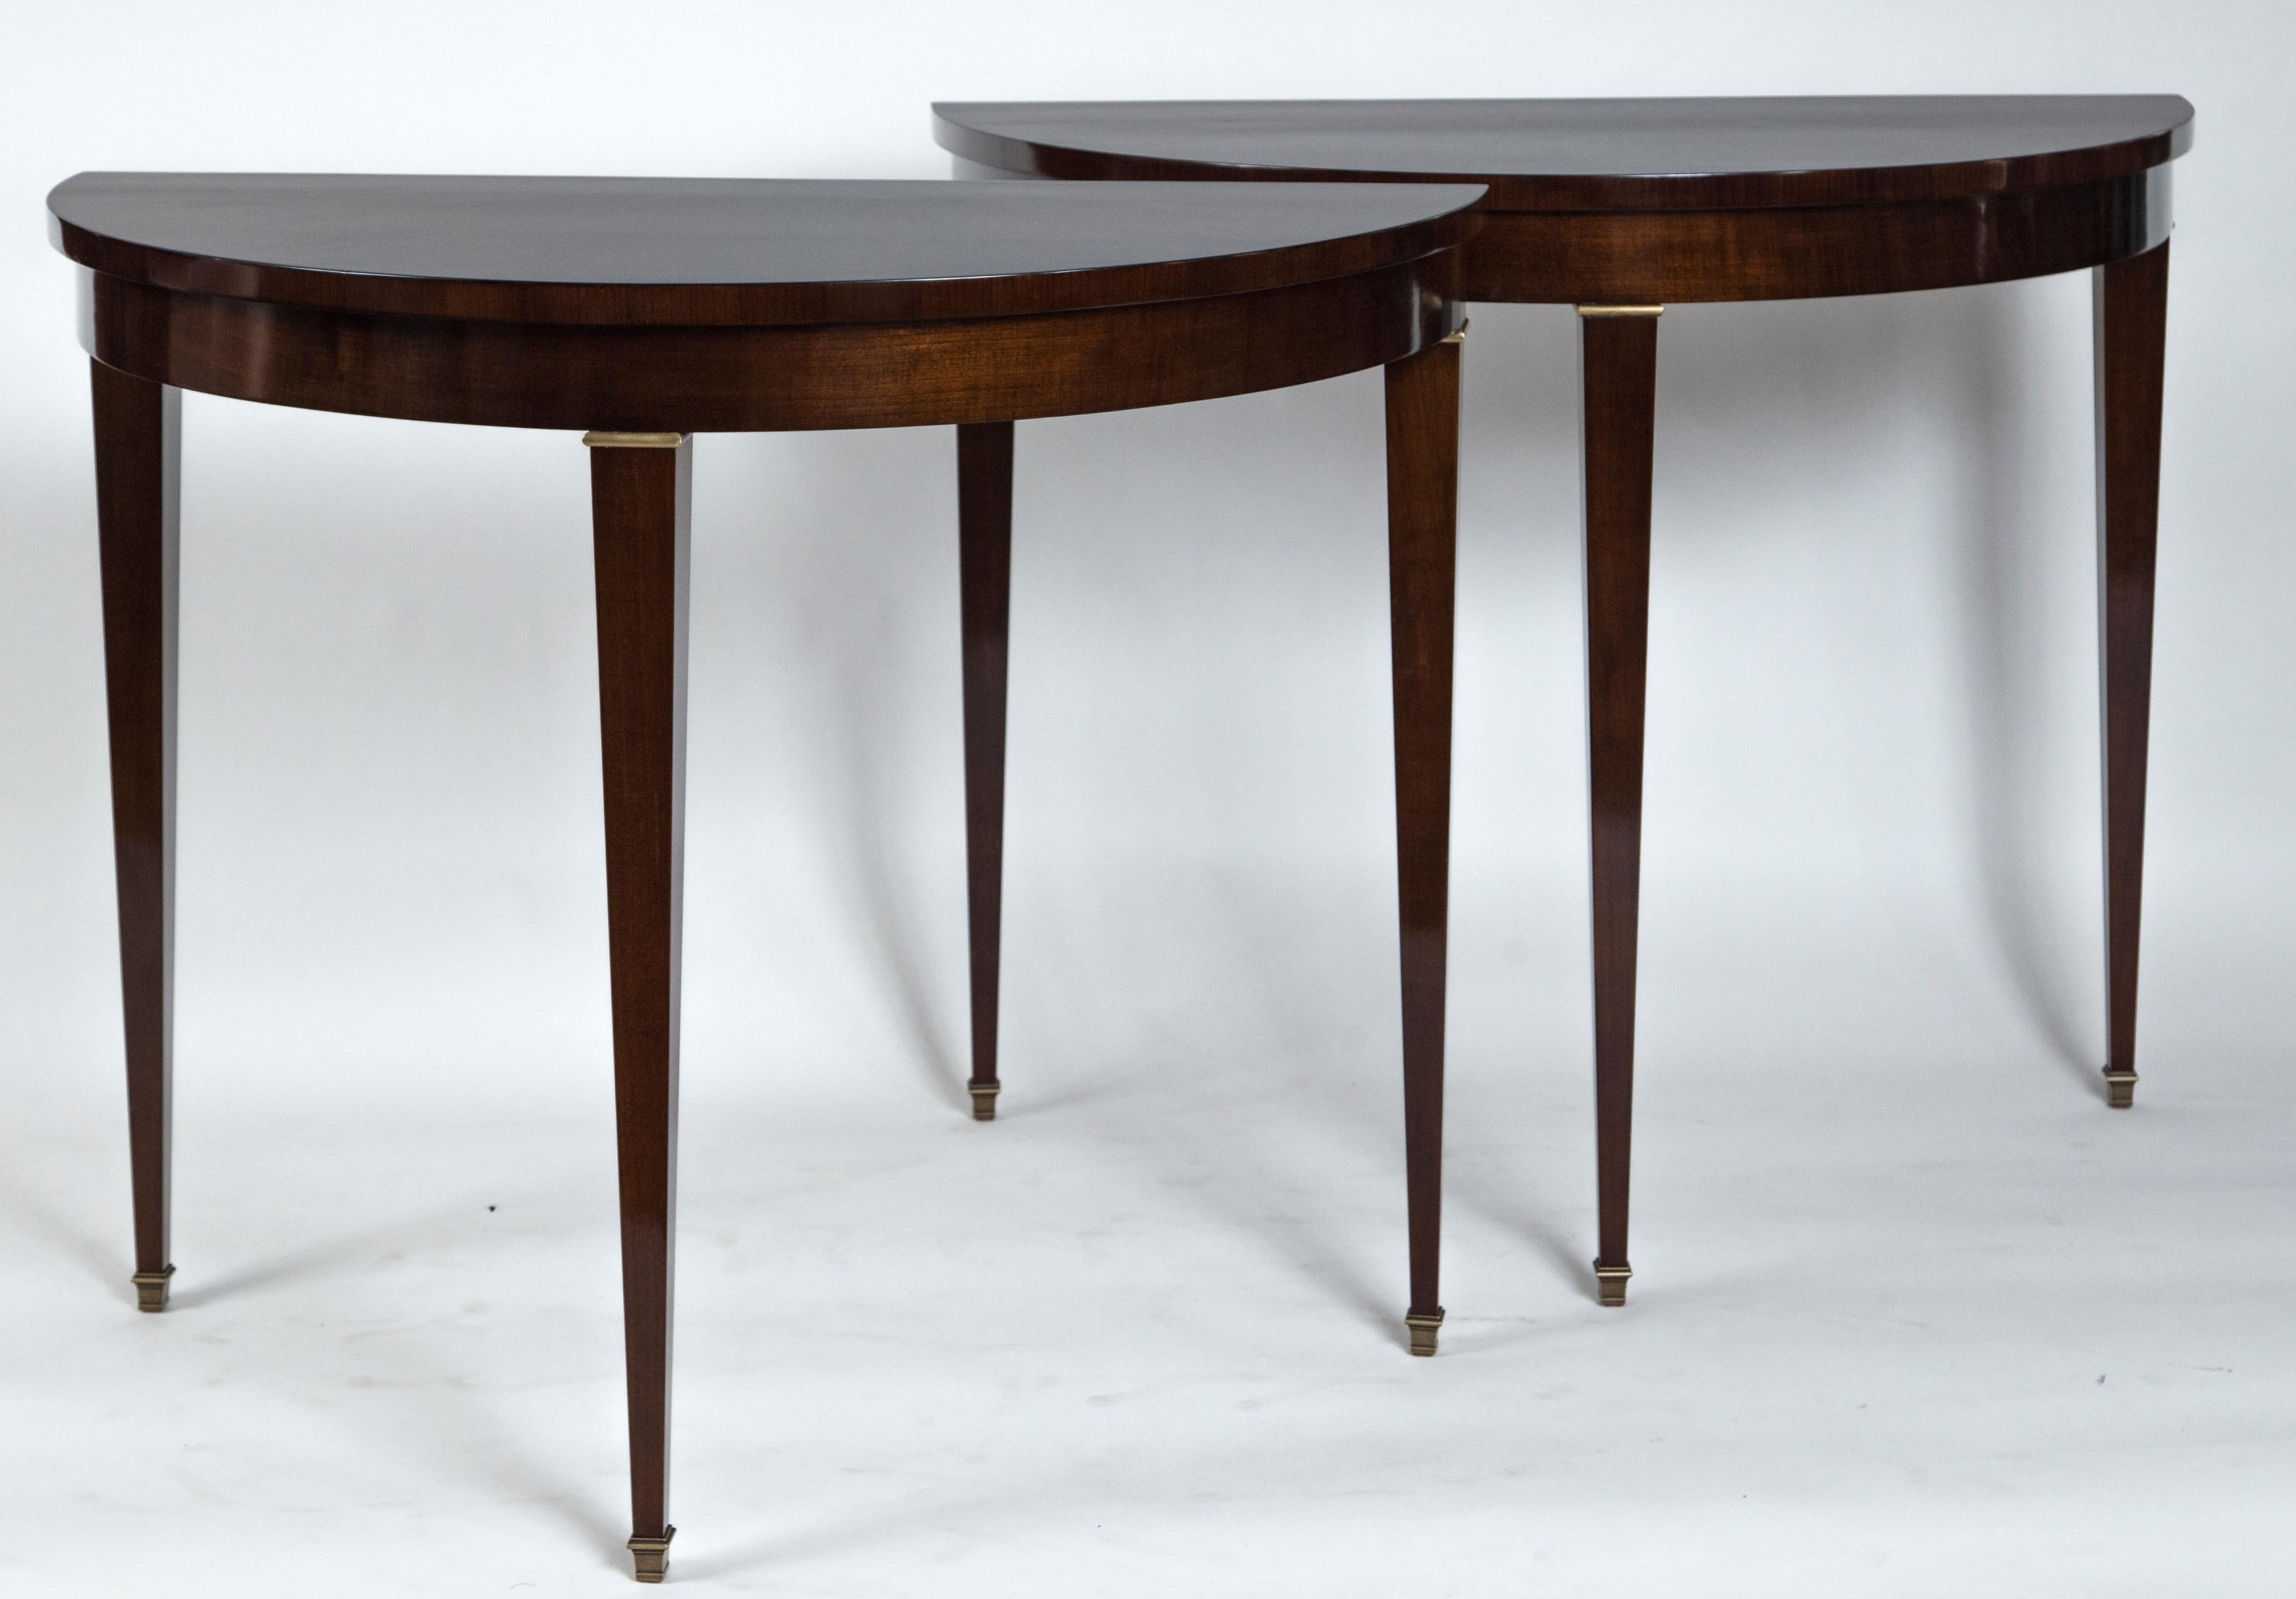 Handsome pair of Italian demilune-shaped consoles finishing on straight tapered legs with brass sabot and brass fittings, tables in a dark cherrywood veneer.
Priced by the pair.
Origin: Italy
Period: circa 1950
Condition: Excellent, refinished